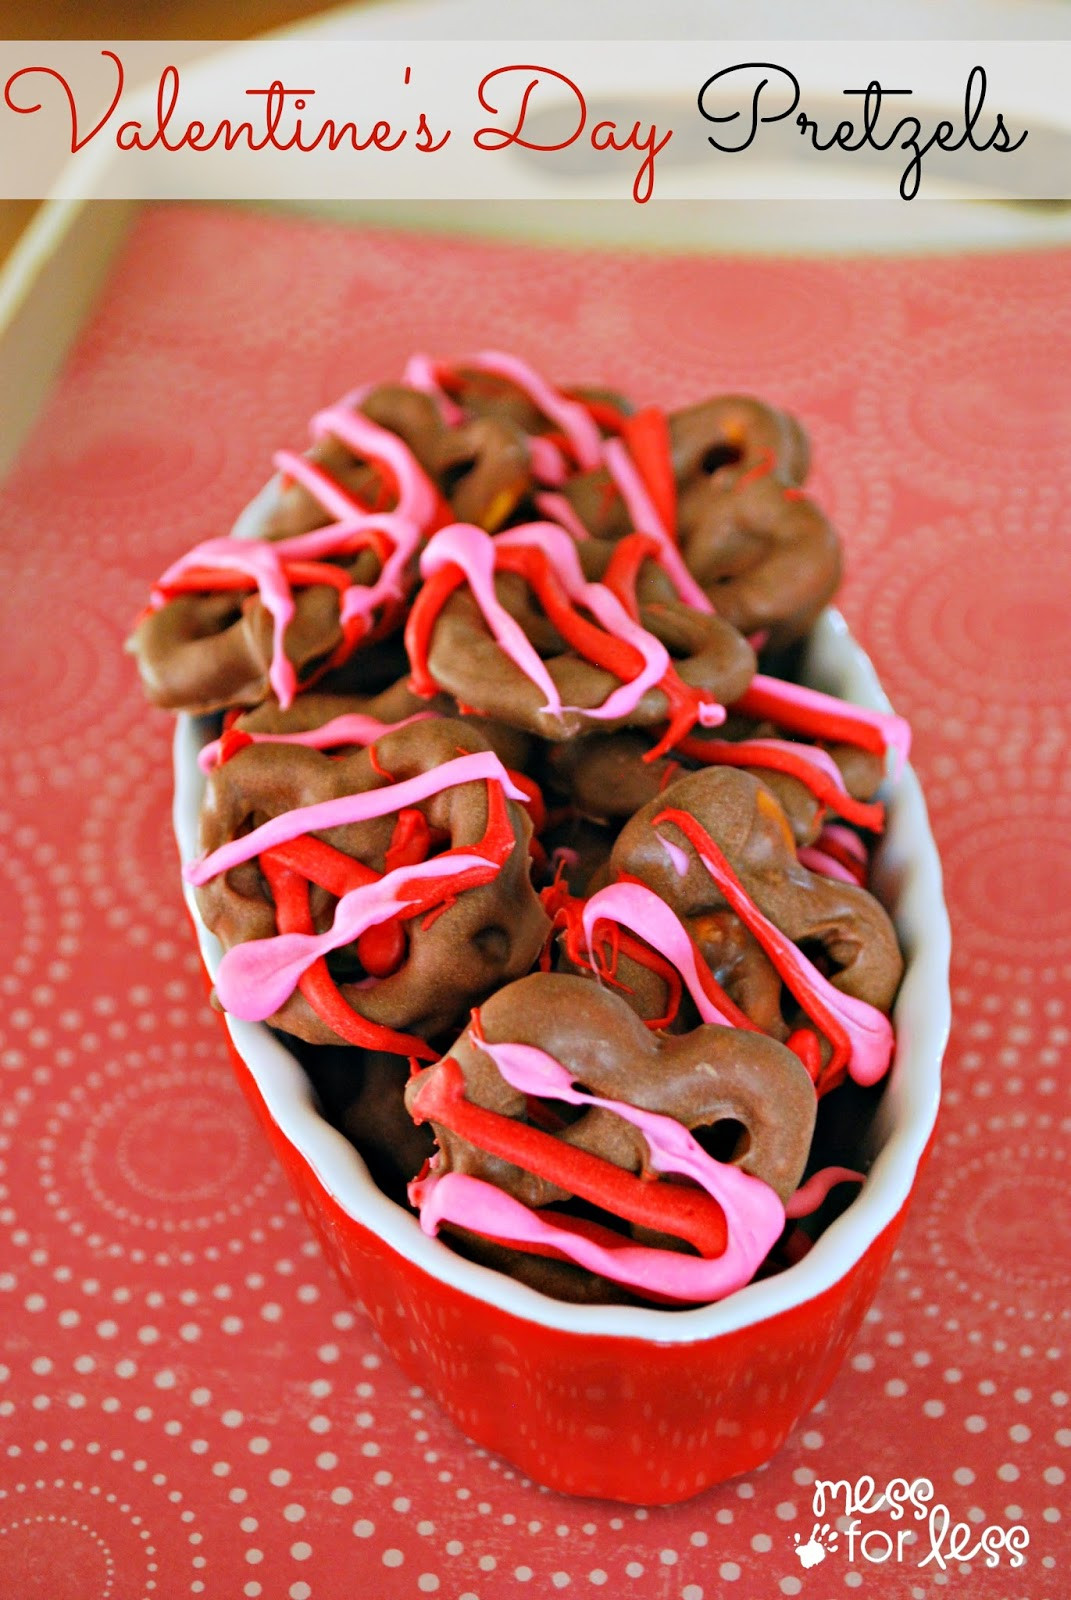 Valentines Chocolate Covered Pretzels
 How To Make Chocolate Covered Pretzels for Valentine s Day